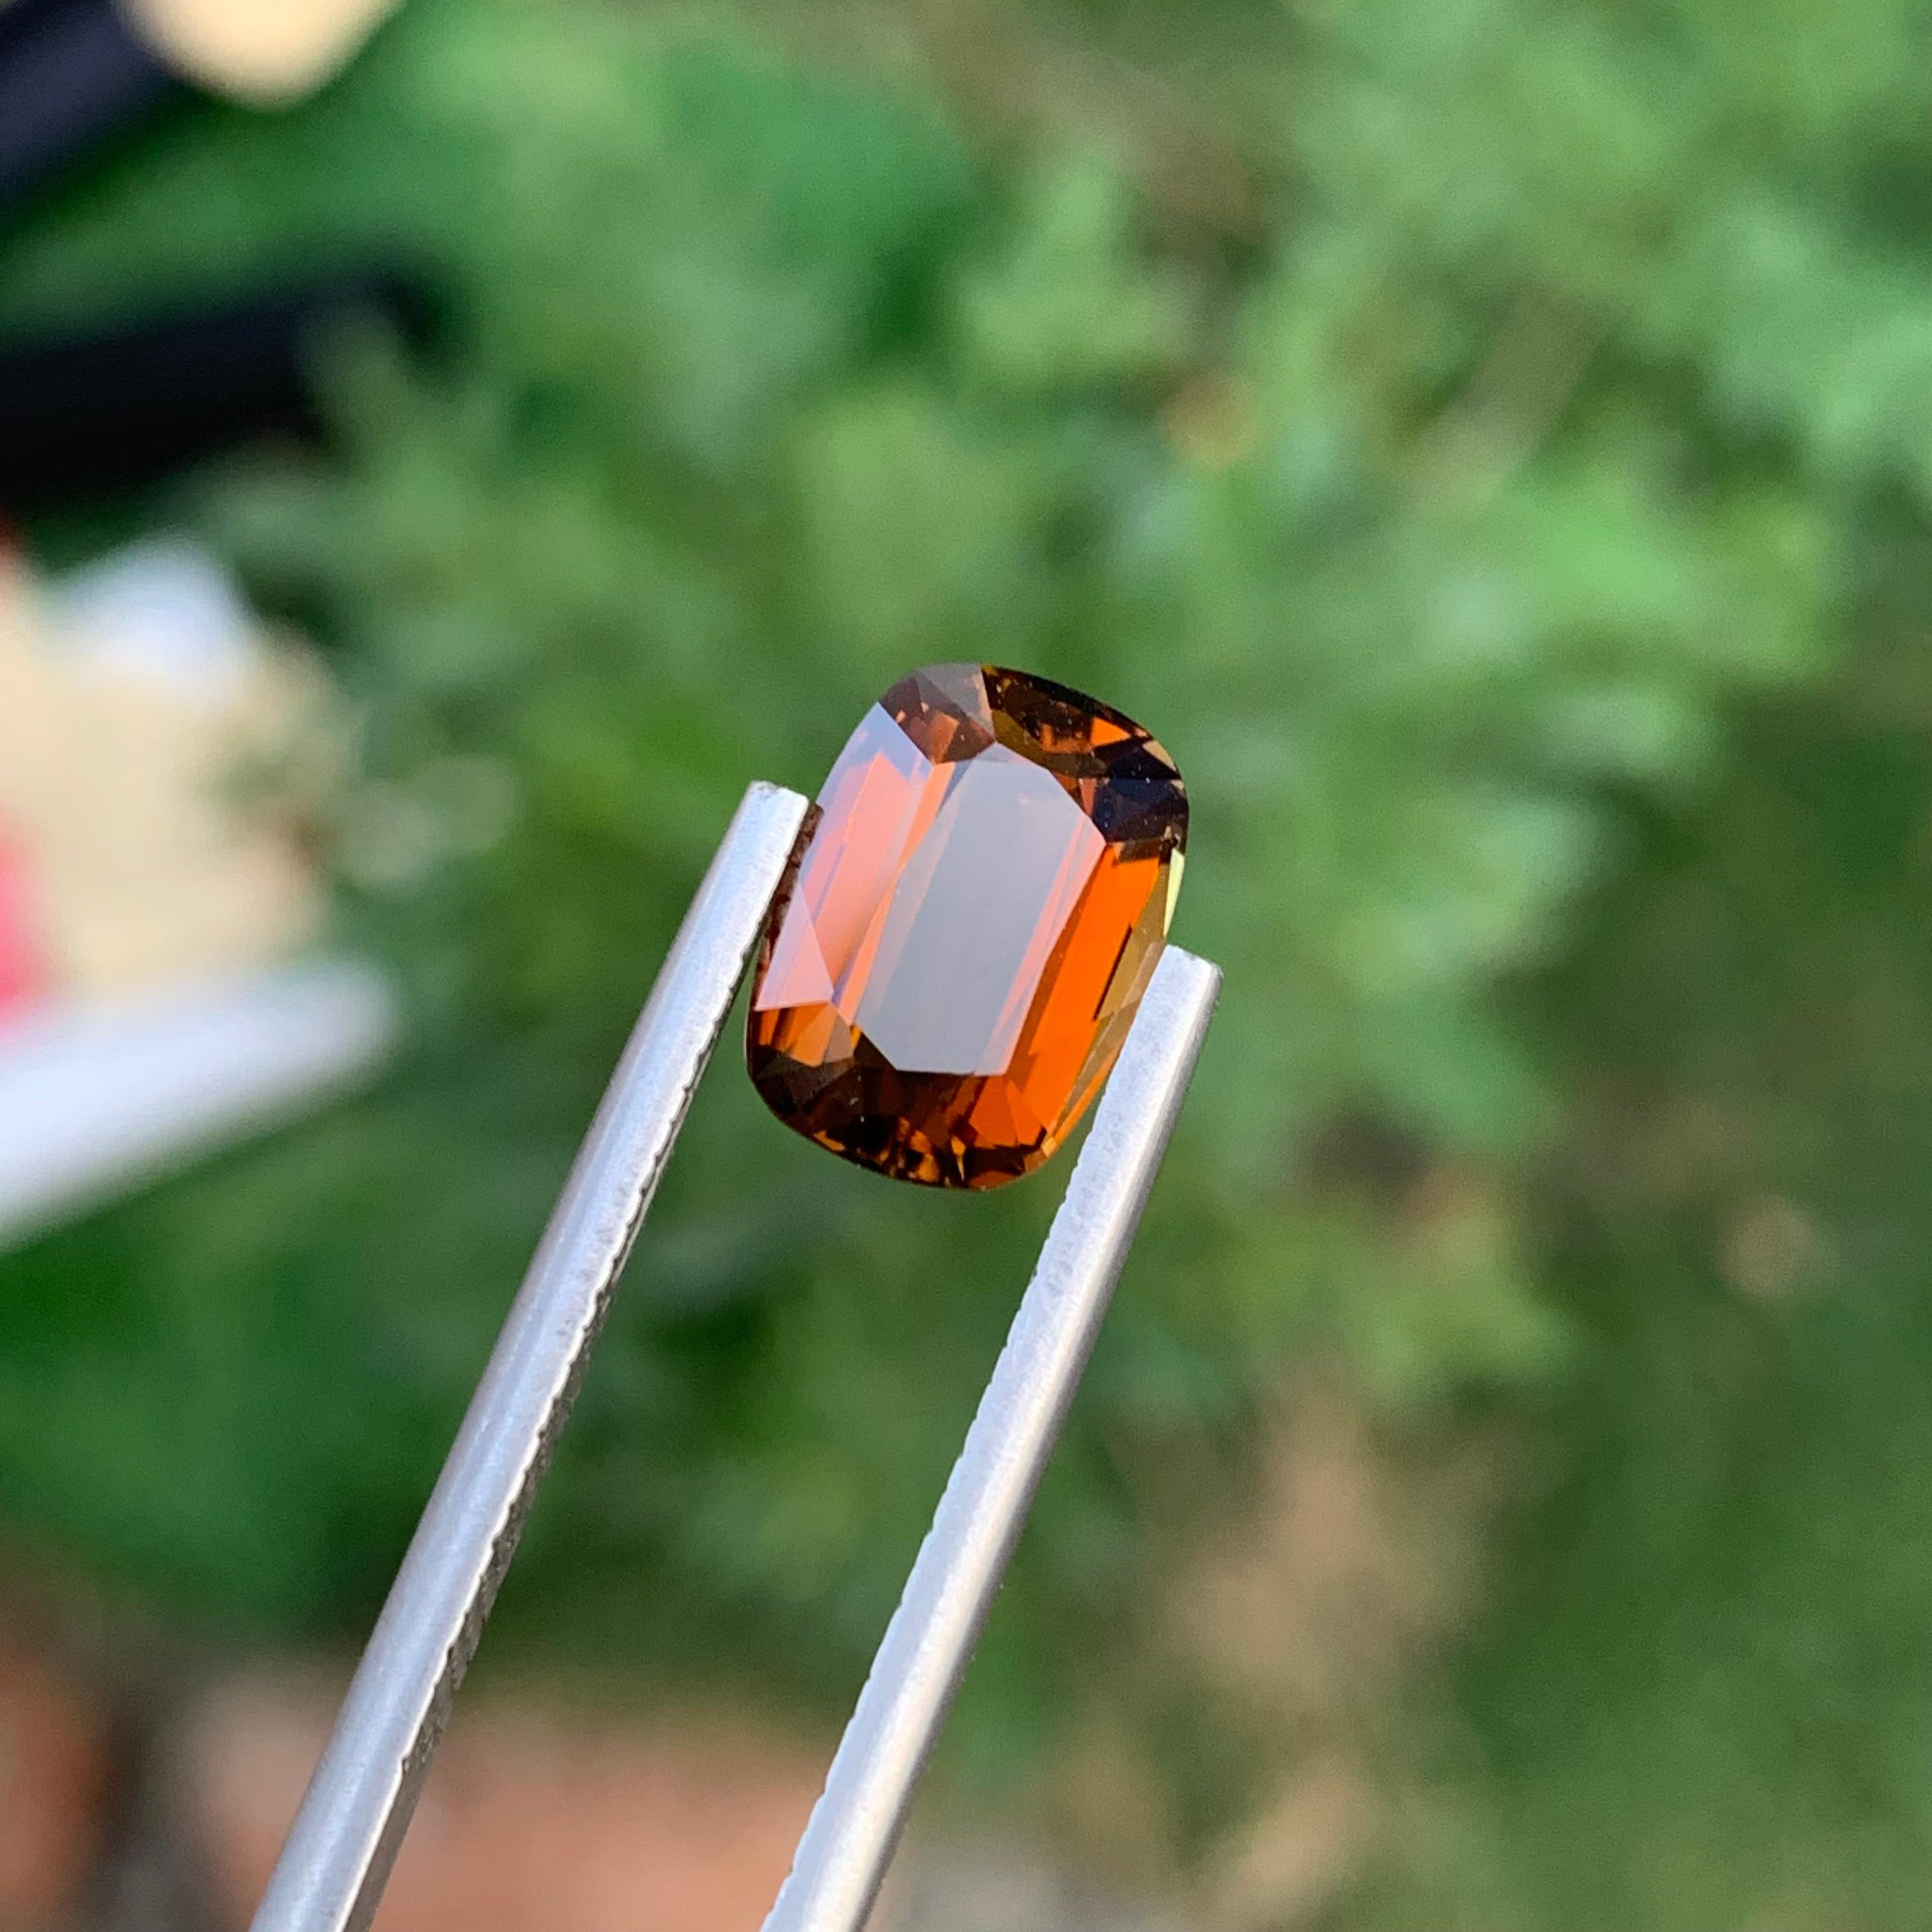 Loose Dravite Tourmaline

Weight: 3.35 Carats
Dimension: 10.5 x 7.6 x 5.1 Mm
Colour: Brown And Orange
Origin: Africa
Certificate: On Demand
Treatment: Non

Tourmaline is a captivating gemstone known for its remarkable variety of colors, making it a